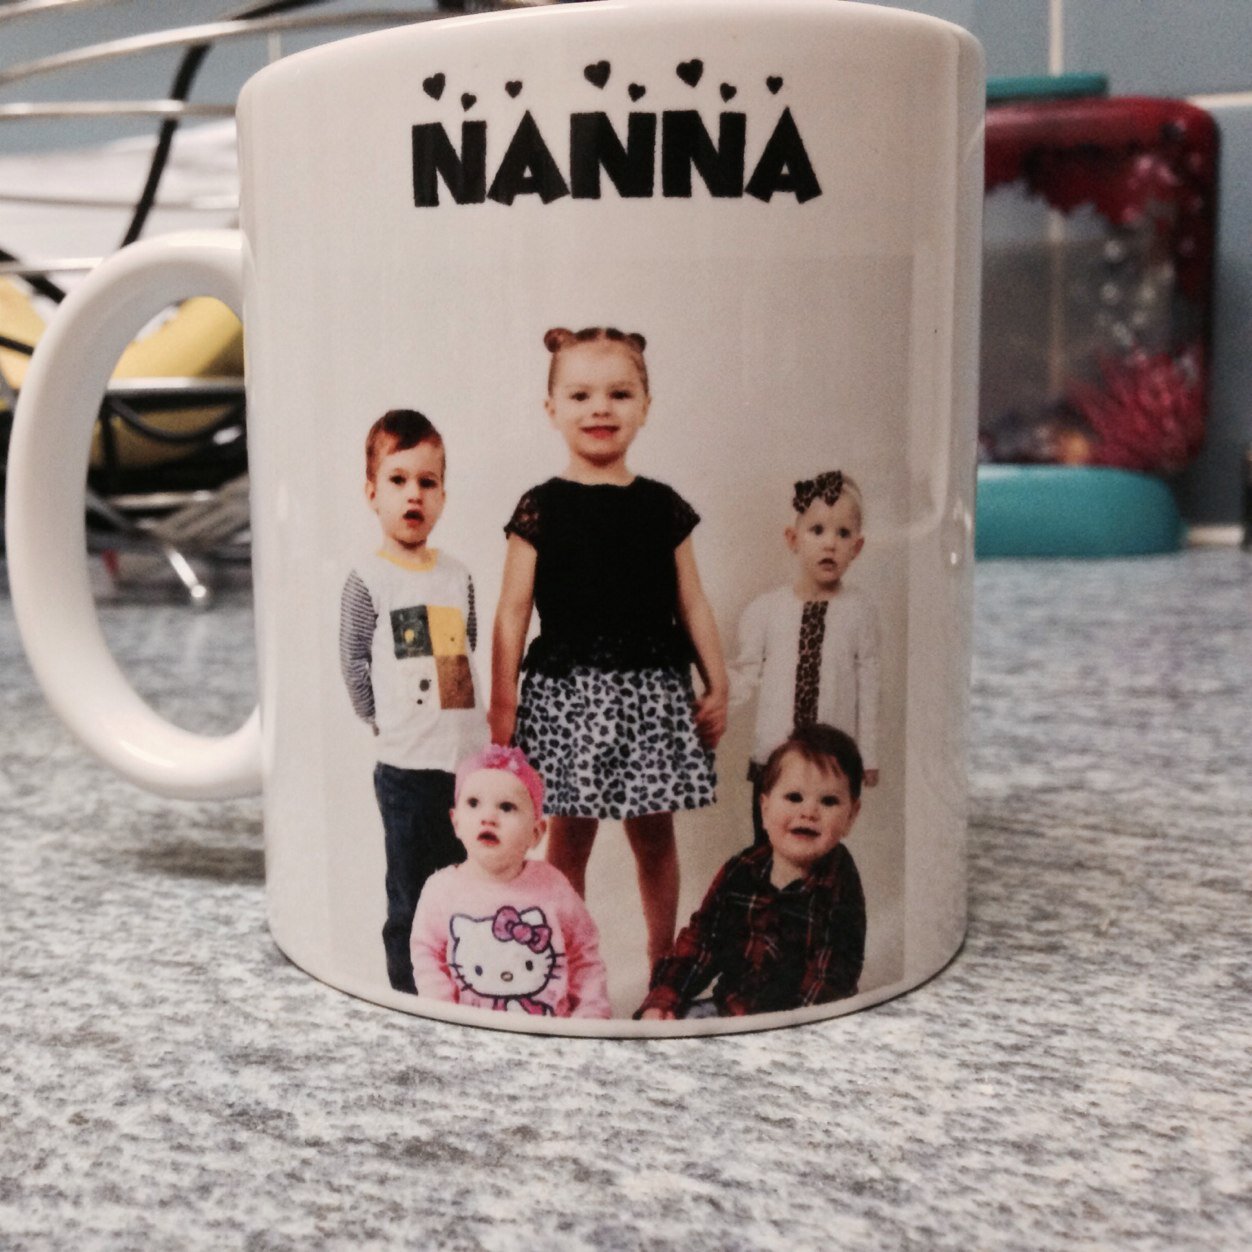 Custom made/Personalised printed mugs tshirts and more! Quality sublimation ink!
Any logo,picture,text,colour. Great for any occasion+makes a great gift!